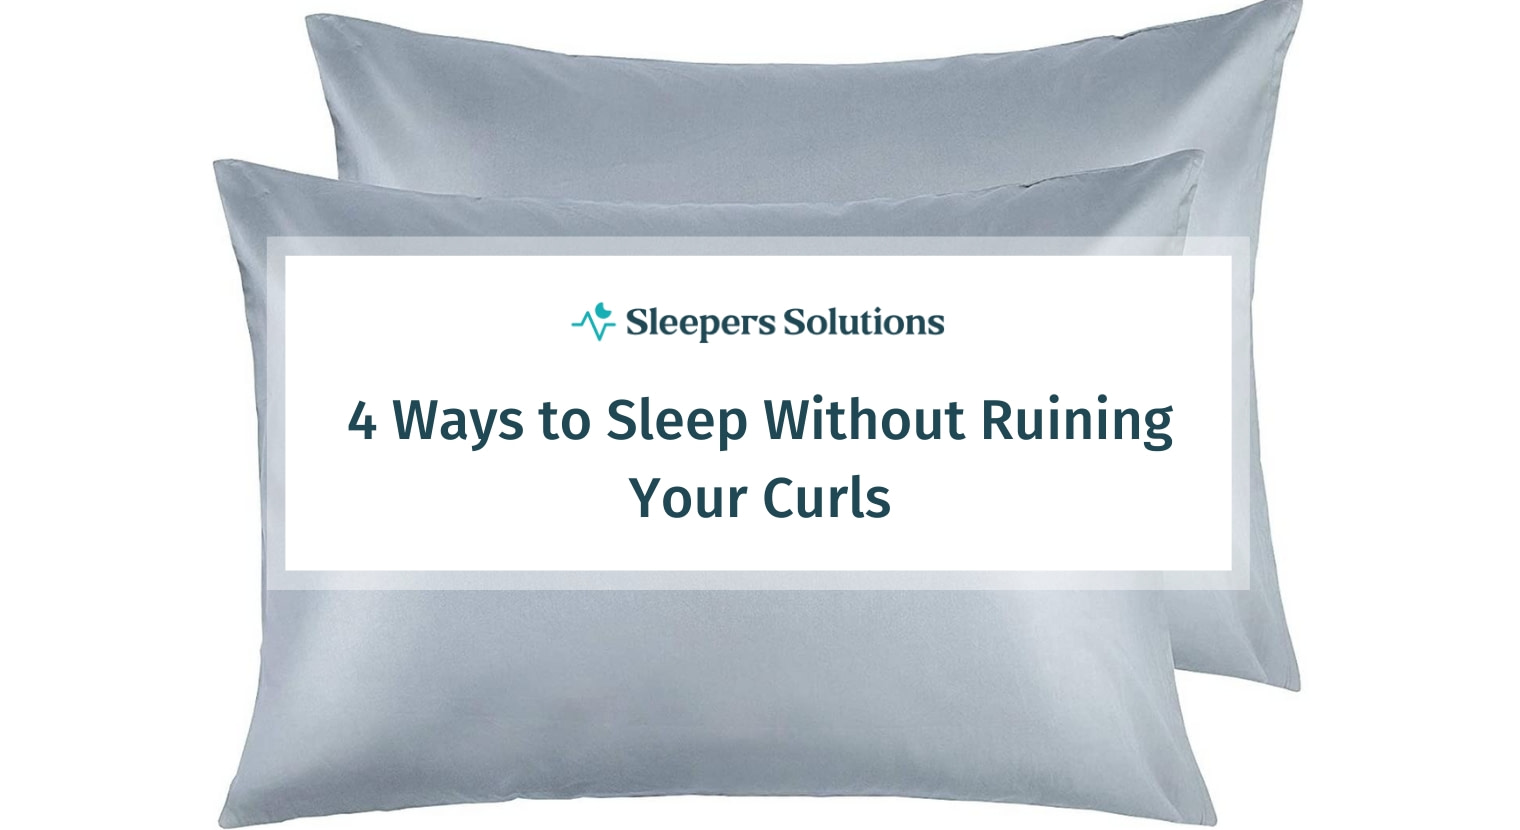 4 Ways to Sleep Without Ruining Your Curls